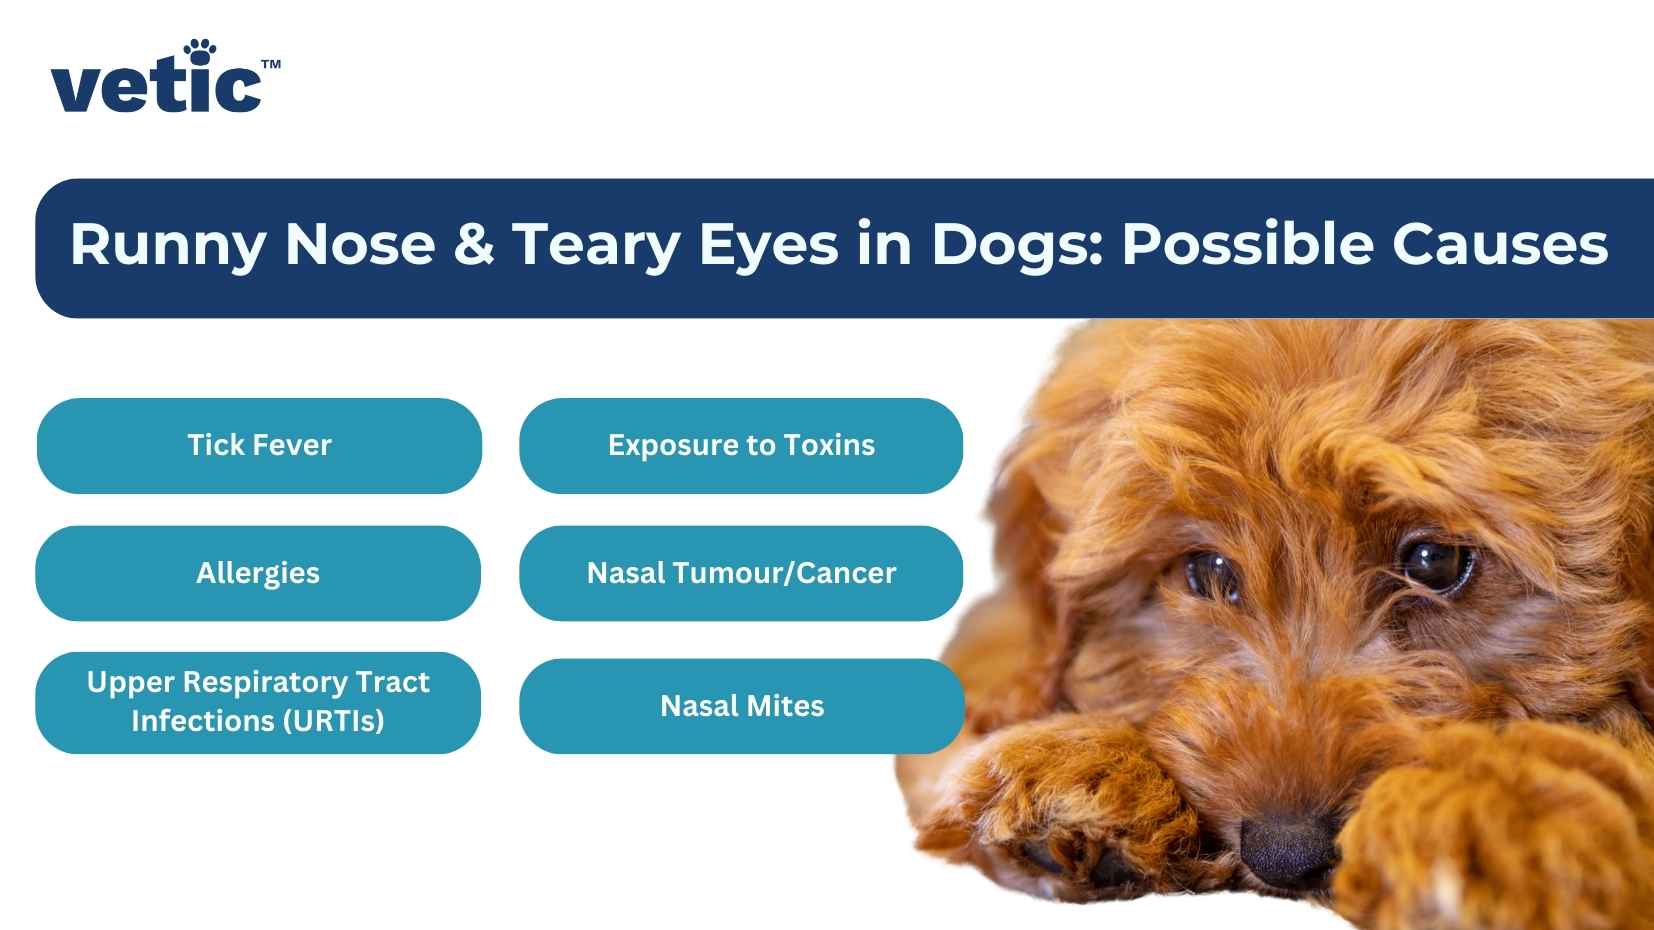 Runny Nose & Teary Eyes in Dogs: Possible Causes Tick fever, allergies, upper respiratory tract infections (UTIs), exposure to toxins, nasal tumour and cancer, and nasal mites.